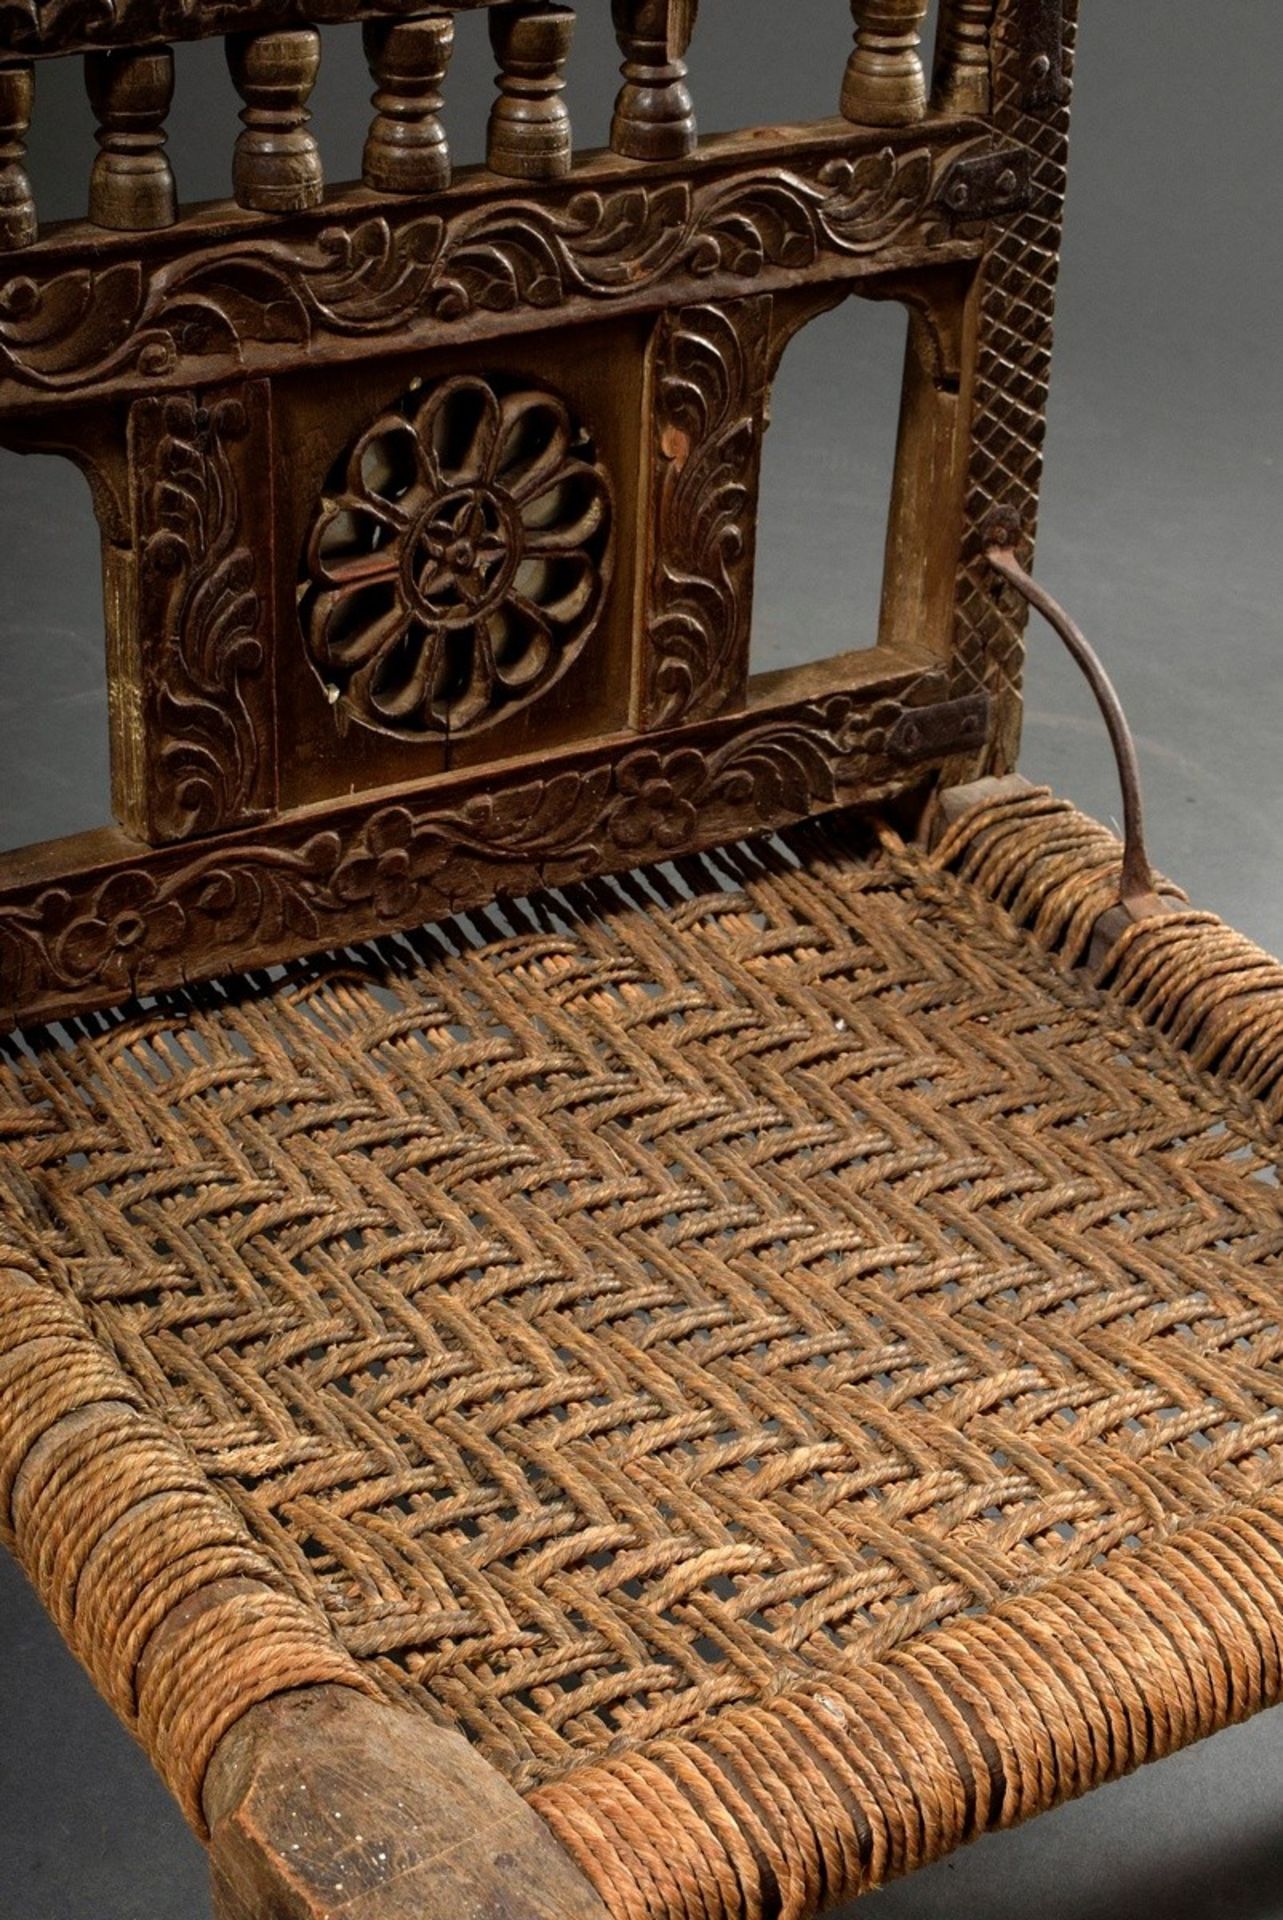 Indian wedding chair with richly carved frame "horses, peacocks and rosettes", around 1900, wood wi - Image 5 of 6